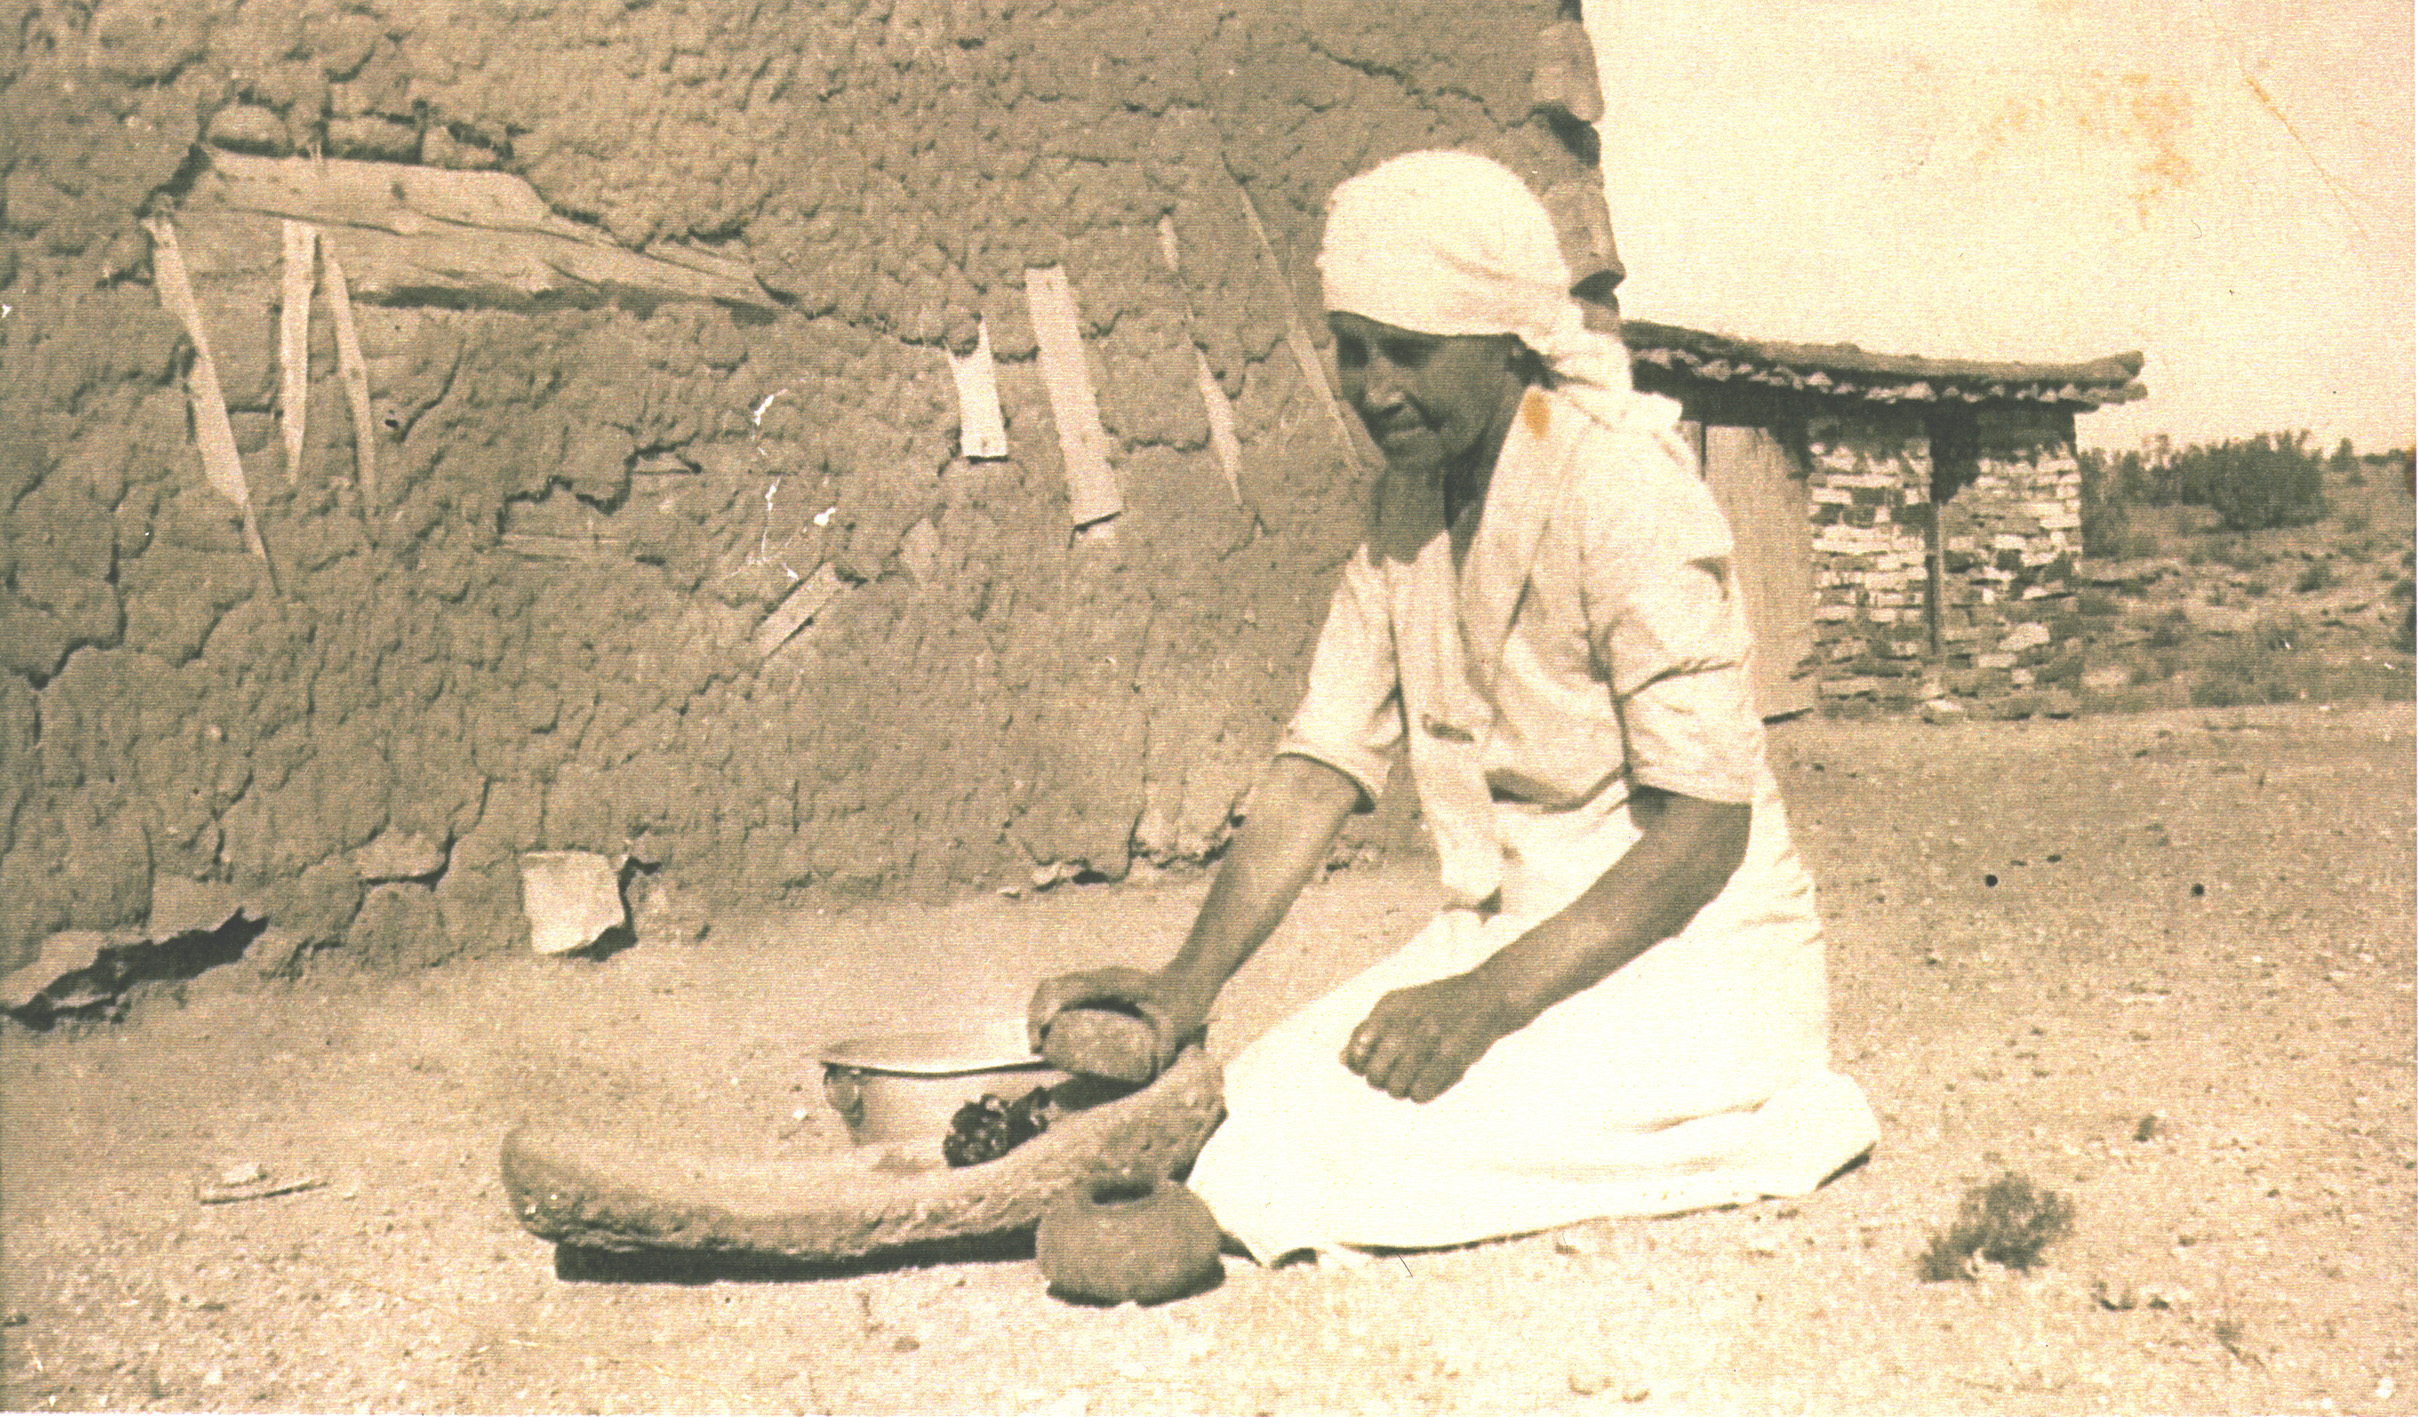 Photo of a woman sitting on the ground in front of a grinding stone, preparing to grind up a small amount of food. Next to her left of the grinding stone there sits a small pottery vessel, and to her right of the stone sits a metal pot that has a small ring handle. The woman is wearing a white skirt and blouse, and her head is wrapped in a white fabric covering that trails past her shoulders down her back. There is an adobe building behind her, and two other buildings behind her in the distance.